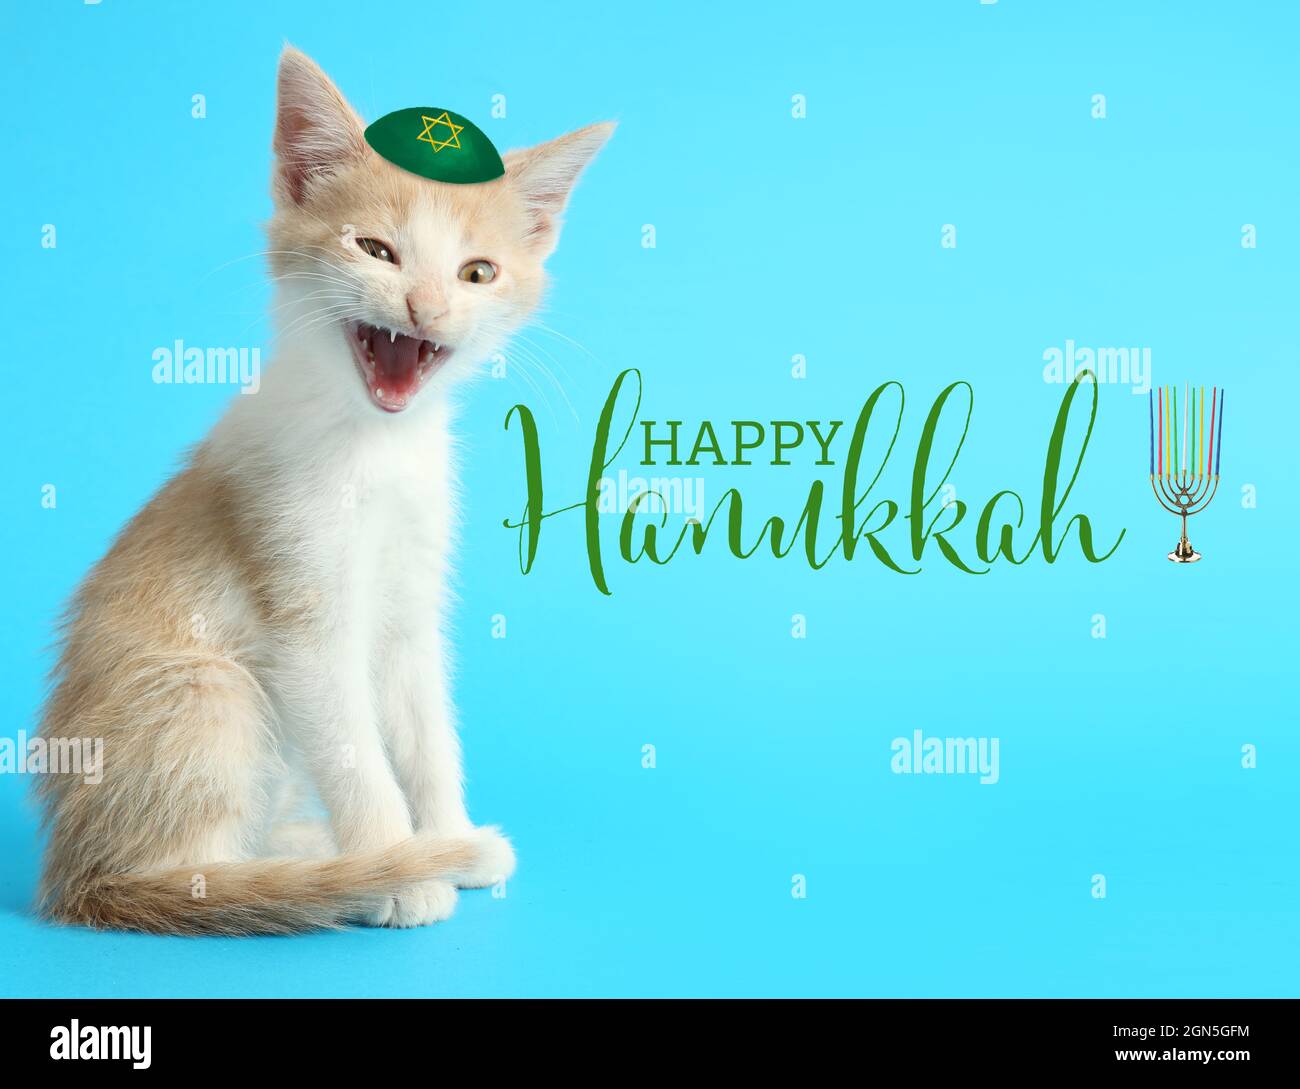 Greeting card for Happy Hannukah with funny Jewish cat Stock Photo - Alamy